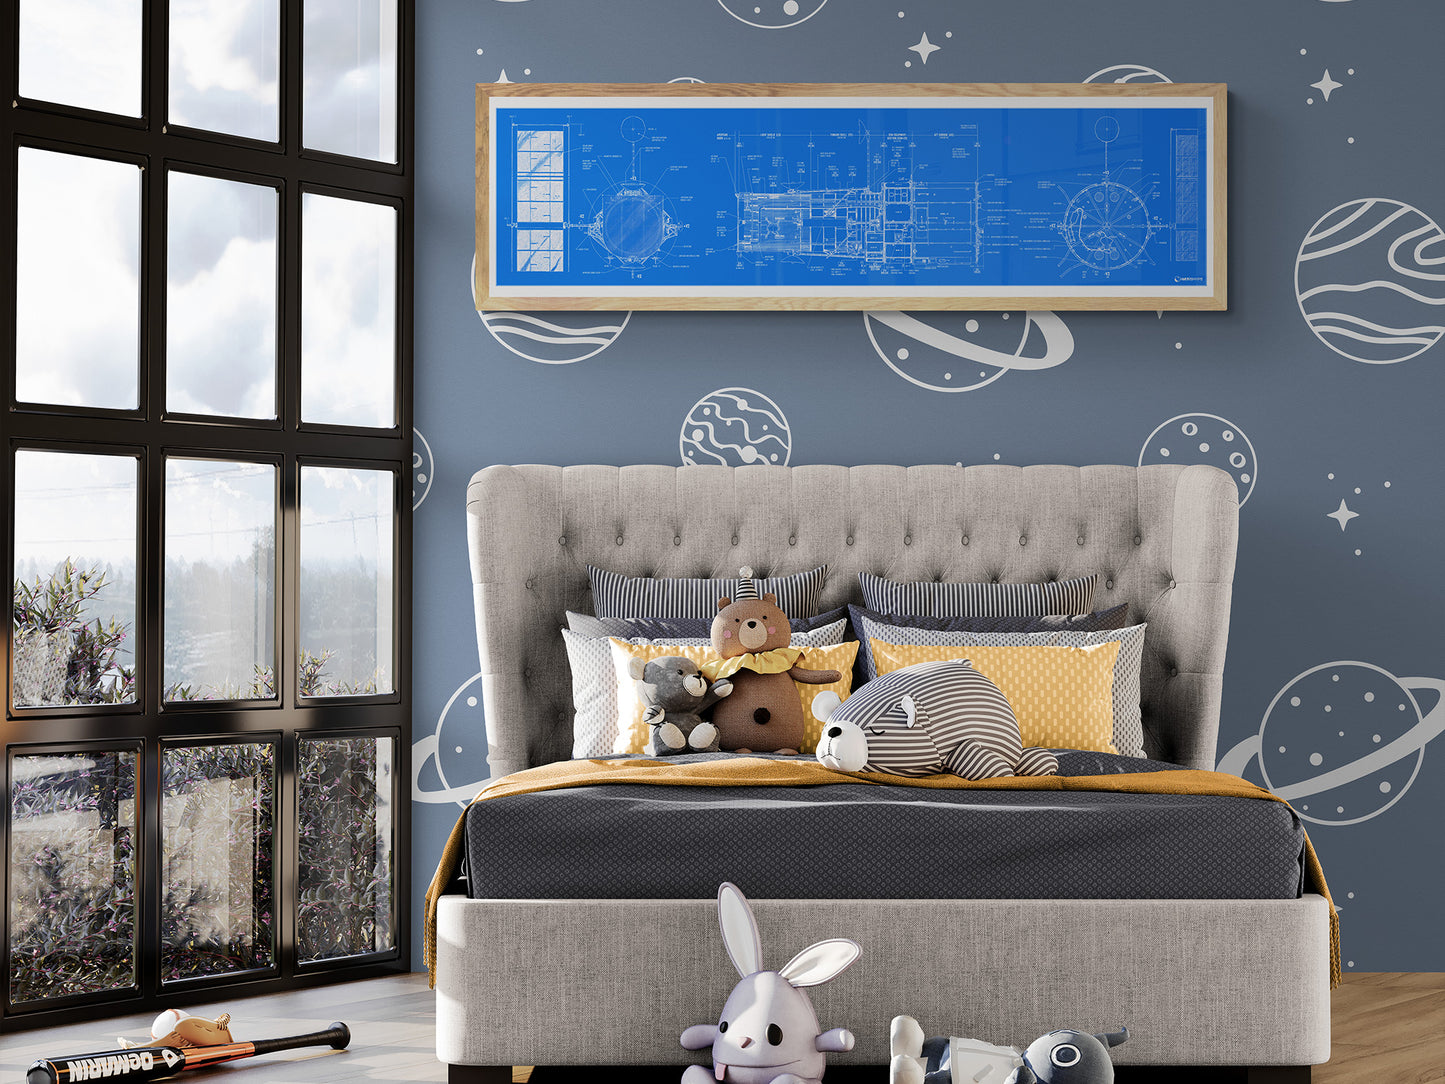 Hubble Space Telescope Blueprint | Rocket Blueprint Posters | A detailed blueprint of the Hubble Space Telescope in a blue frame is displayed on a space-themed wall in a child's bedroom. The room includes a gray bed with yellow accents, stuffed animals, and a large window showing an outdoor view.